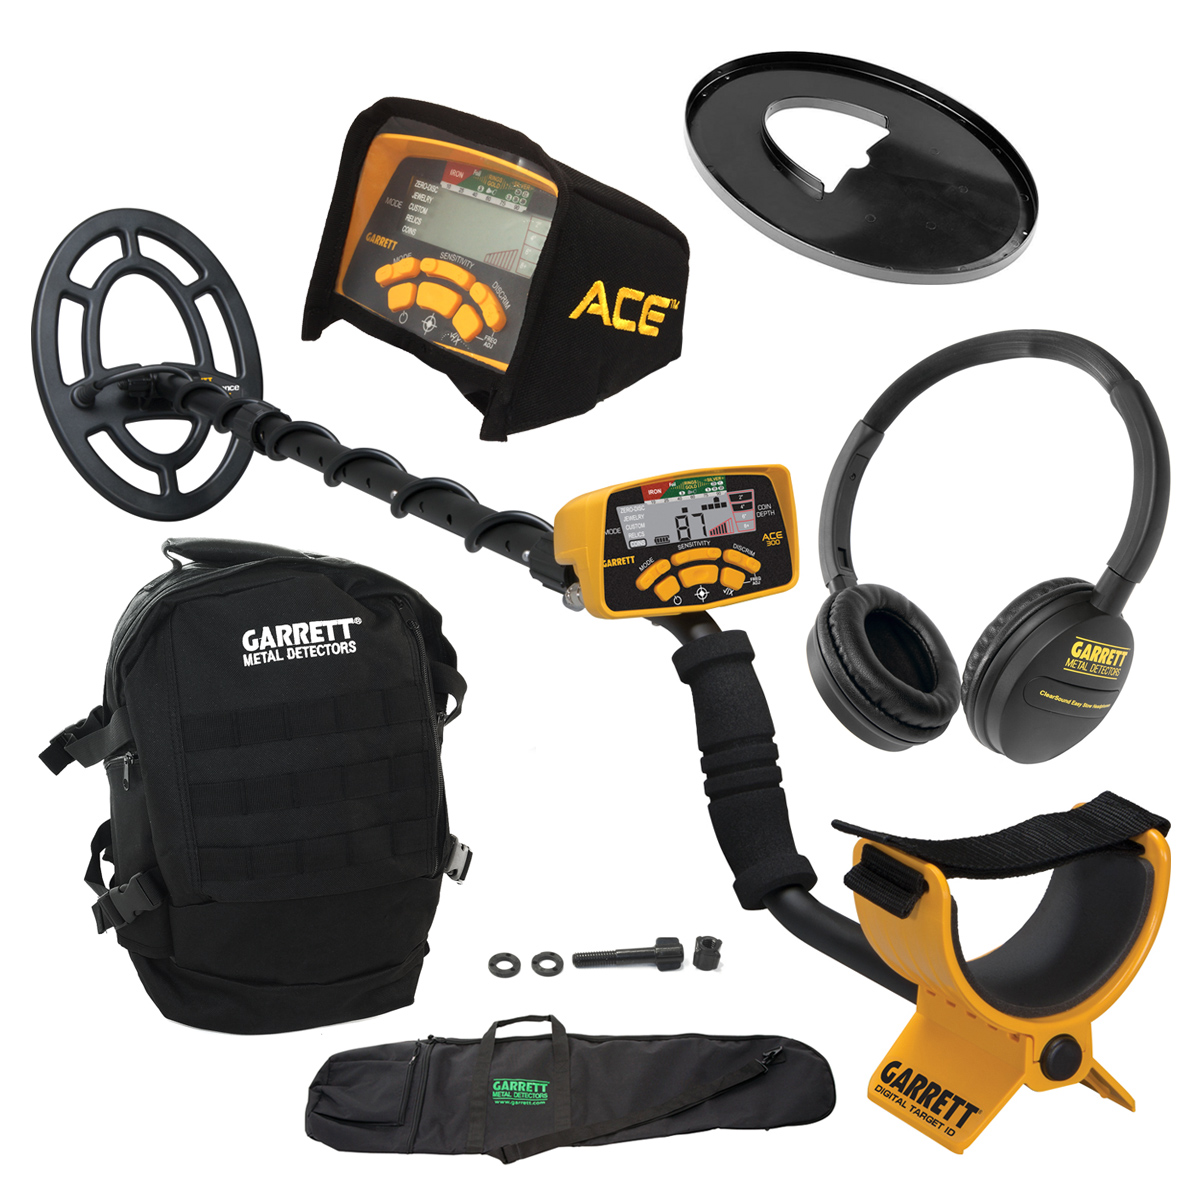 ACE 250 Metal Detector with Submersible Search Coil Plus Headphones 